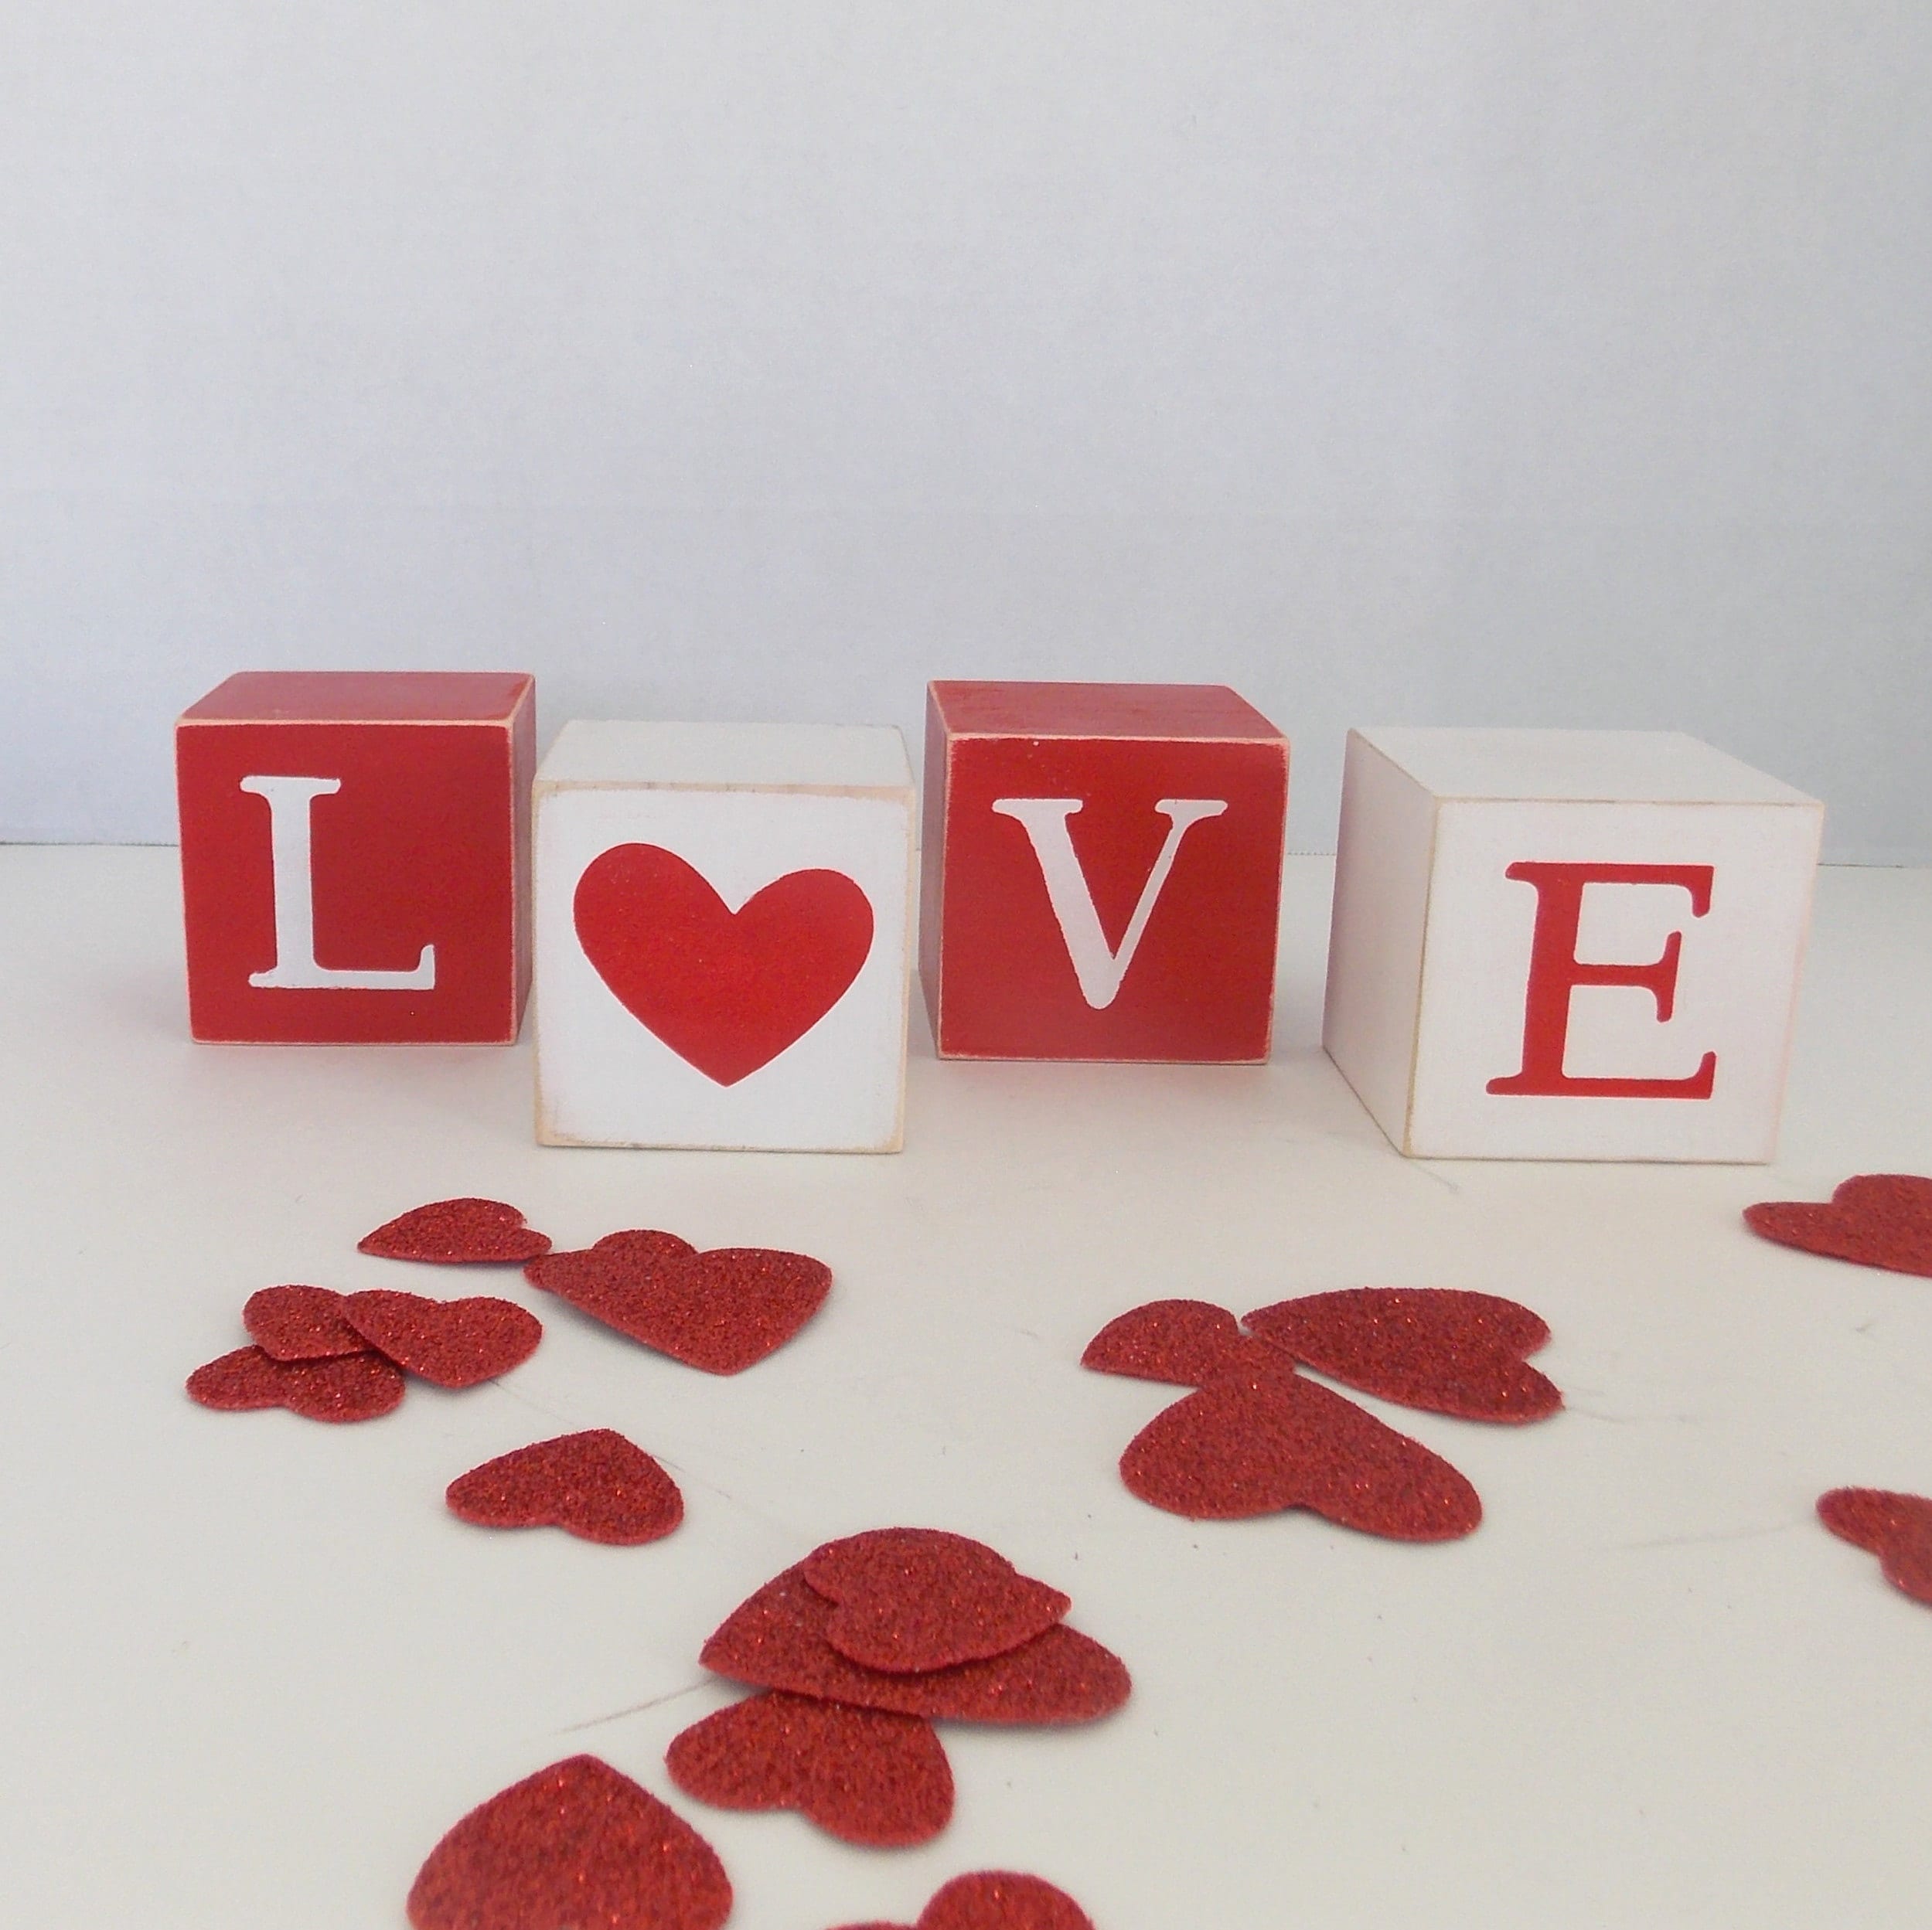 PS I Love You Mini Resin Heart Fridge Magnets for Valentines Day, Handmade  and Hand Painted Sentimental Message for Couples Cubicle Decor 